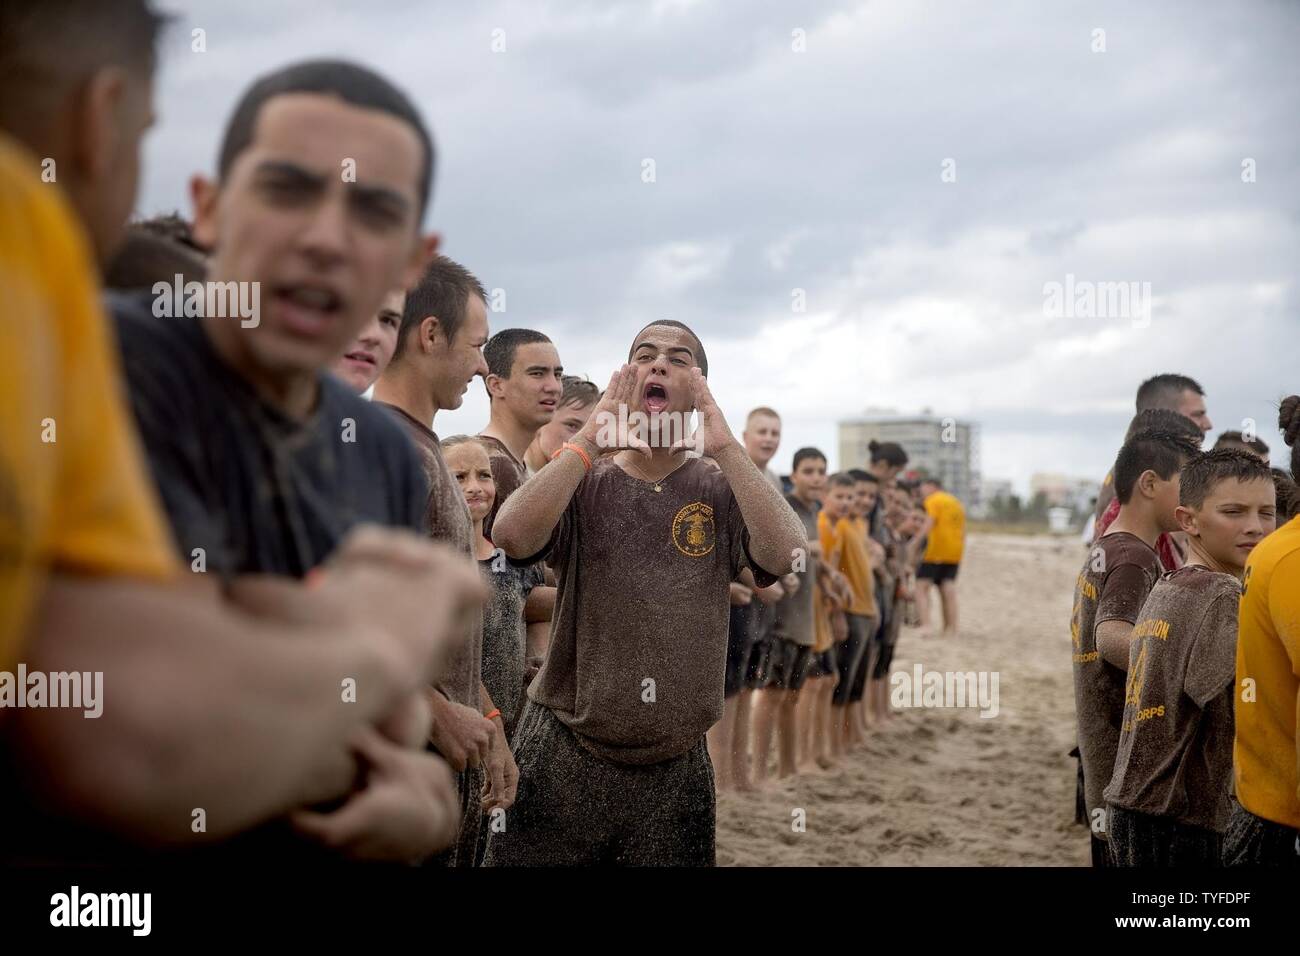 FORT PIERCE, Fla. (Nov. 5, 2016) U.S. Naval Sea Cadet Corps Seaman Apprentice Cadiz, Centurion Battalion, shouts a rallying cry to his shipmates during beach physical training. Cadets perform a variety of types of community service benefiting their hometowns, including roadside and park clean-up efforts and volunteering at public libraries and museums. Cadets also provide support to veterans through outreach programs and honor guard detachments for memorial services. Stock Photo